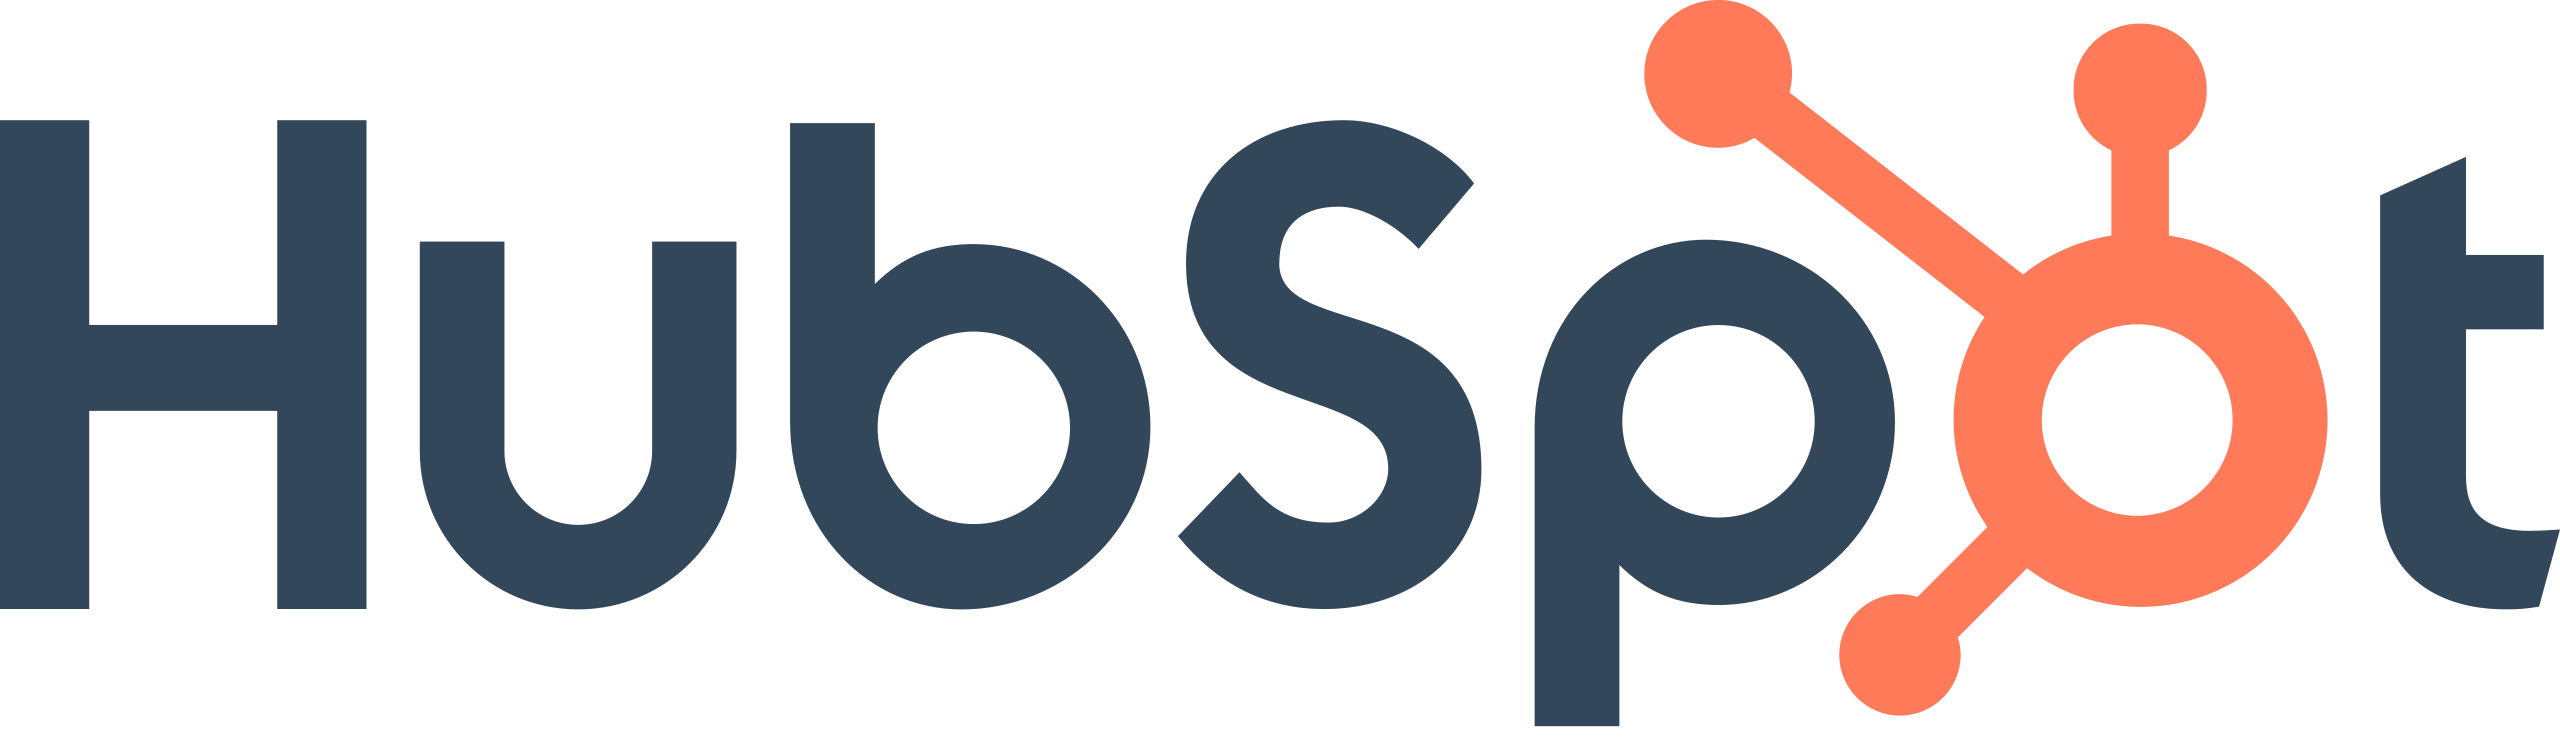 Hubspot logo - the word Hubspot written out in gray text with an orange splat replacing the o